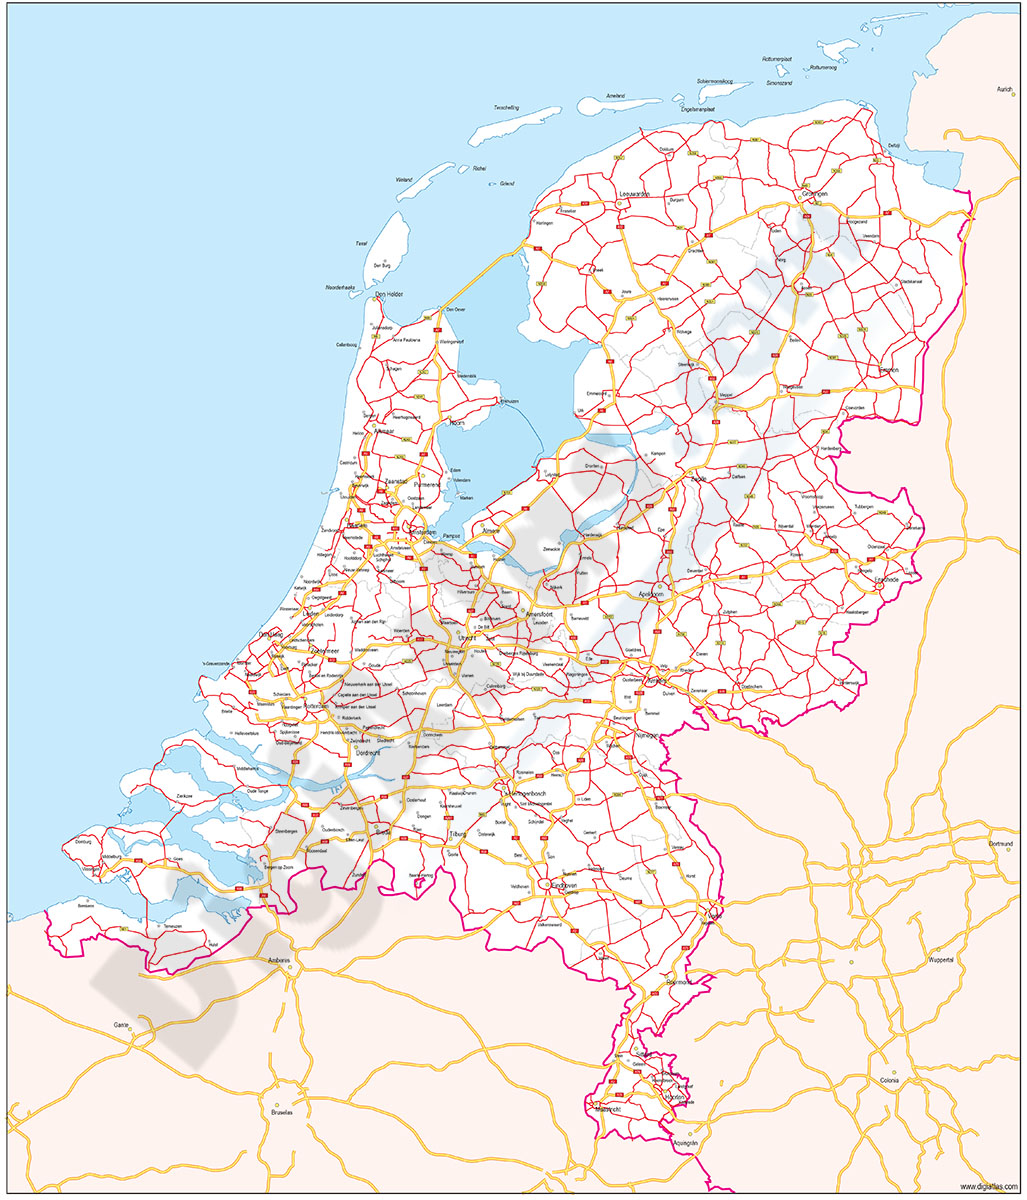 Map of Netherlands with major roads